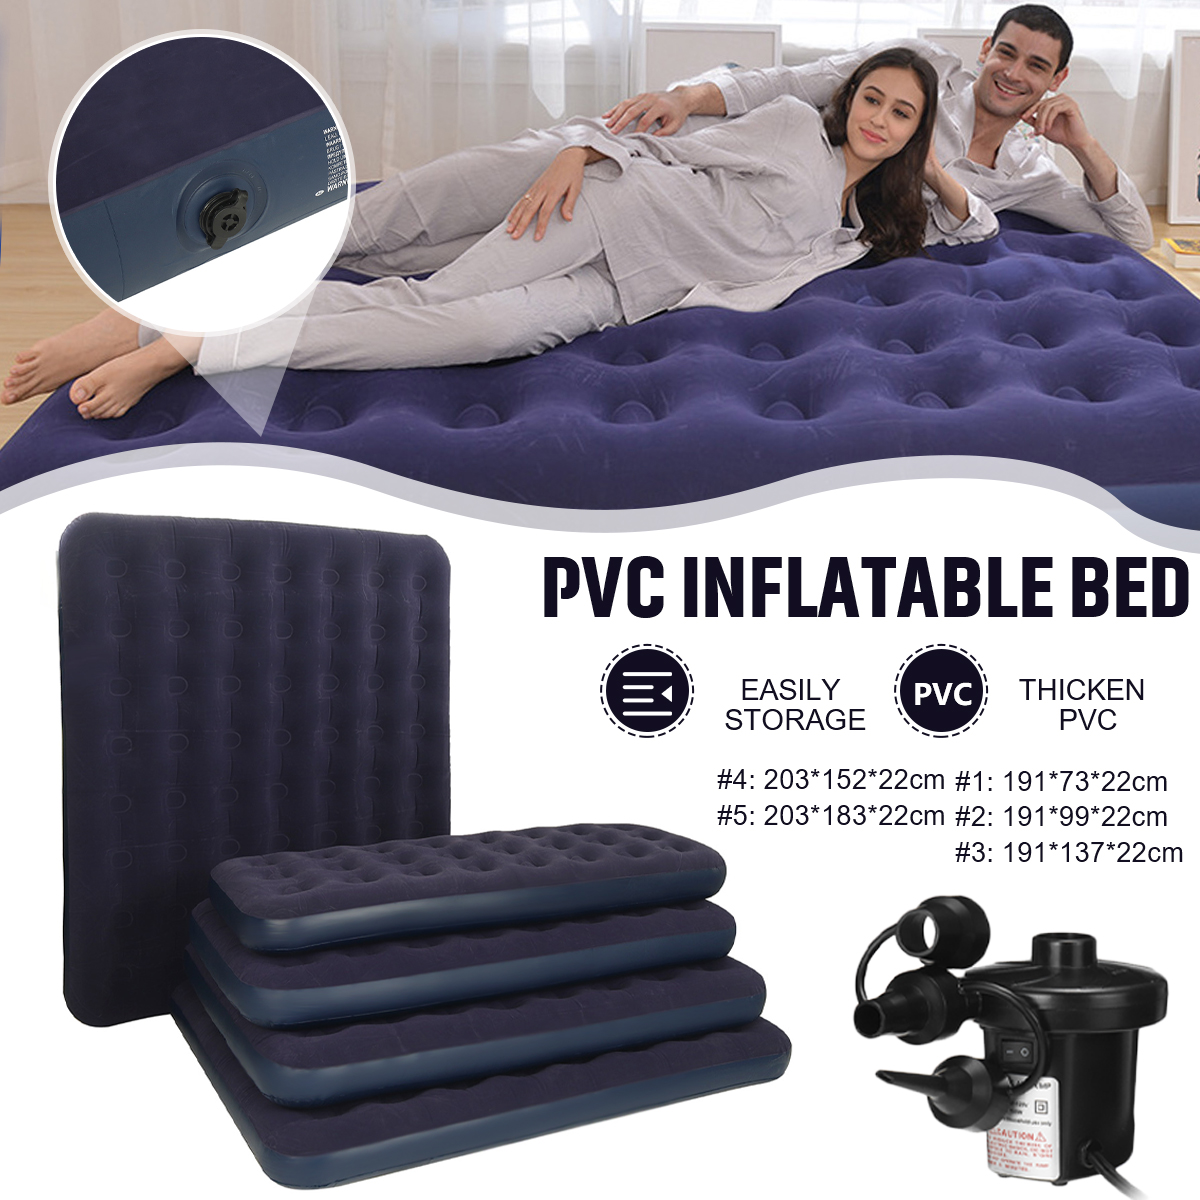 PVC-Inflatable-Bed-Inflatable-Mattress-Air-Mattress-Bed-Single-Double-Wide-Soft-Mattress-Comfortable-1842780-2